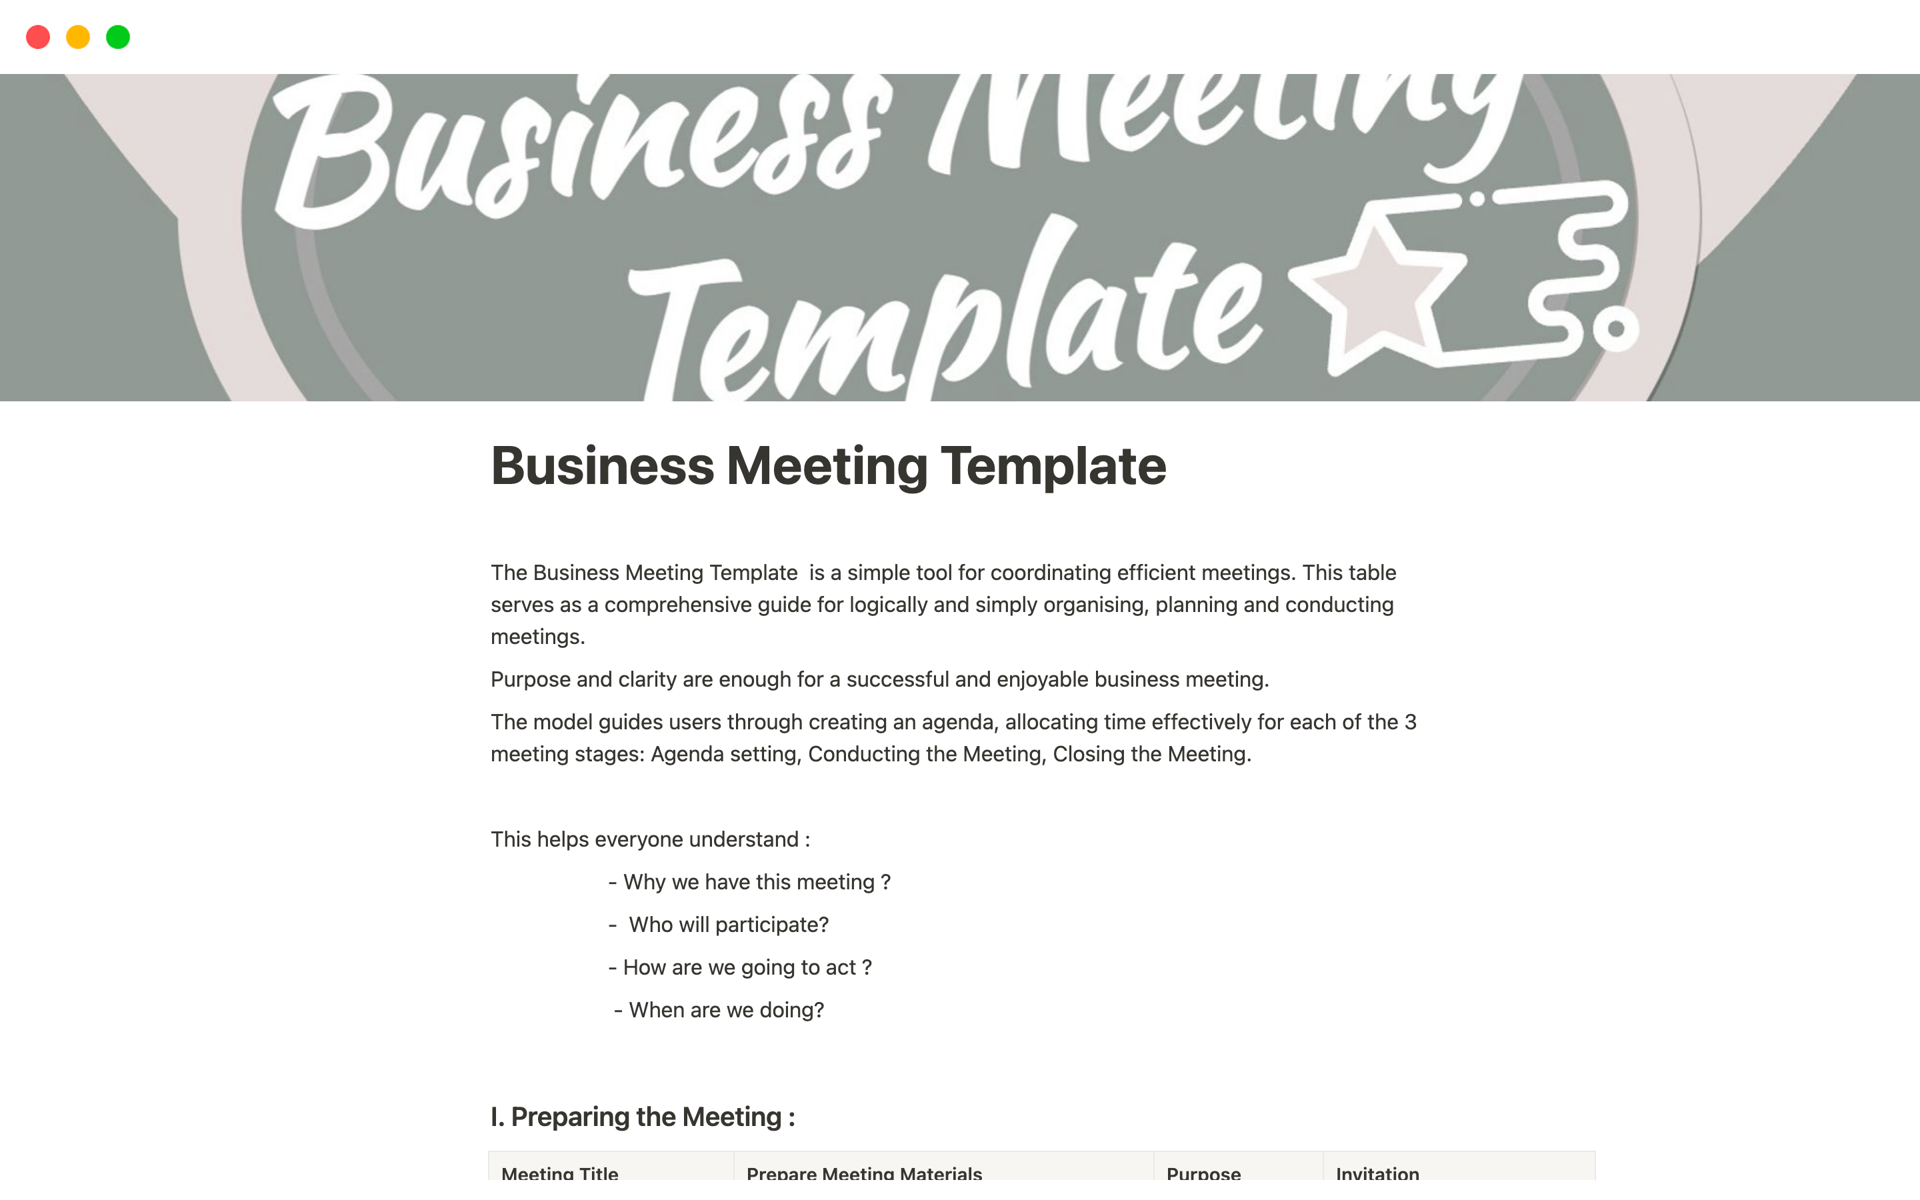 A template preview for Business Meeting